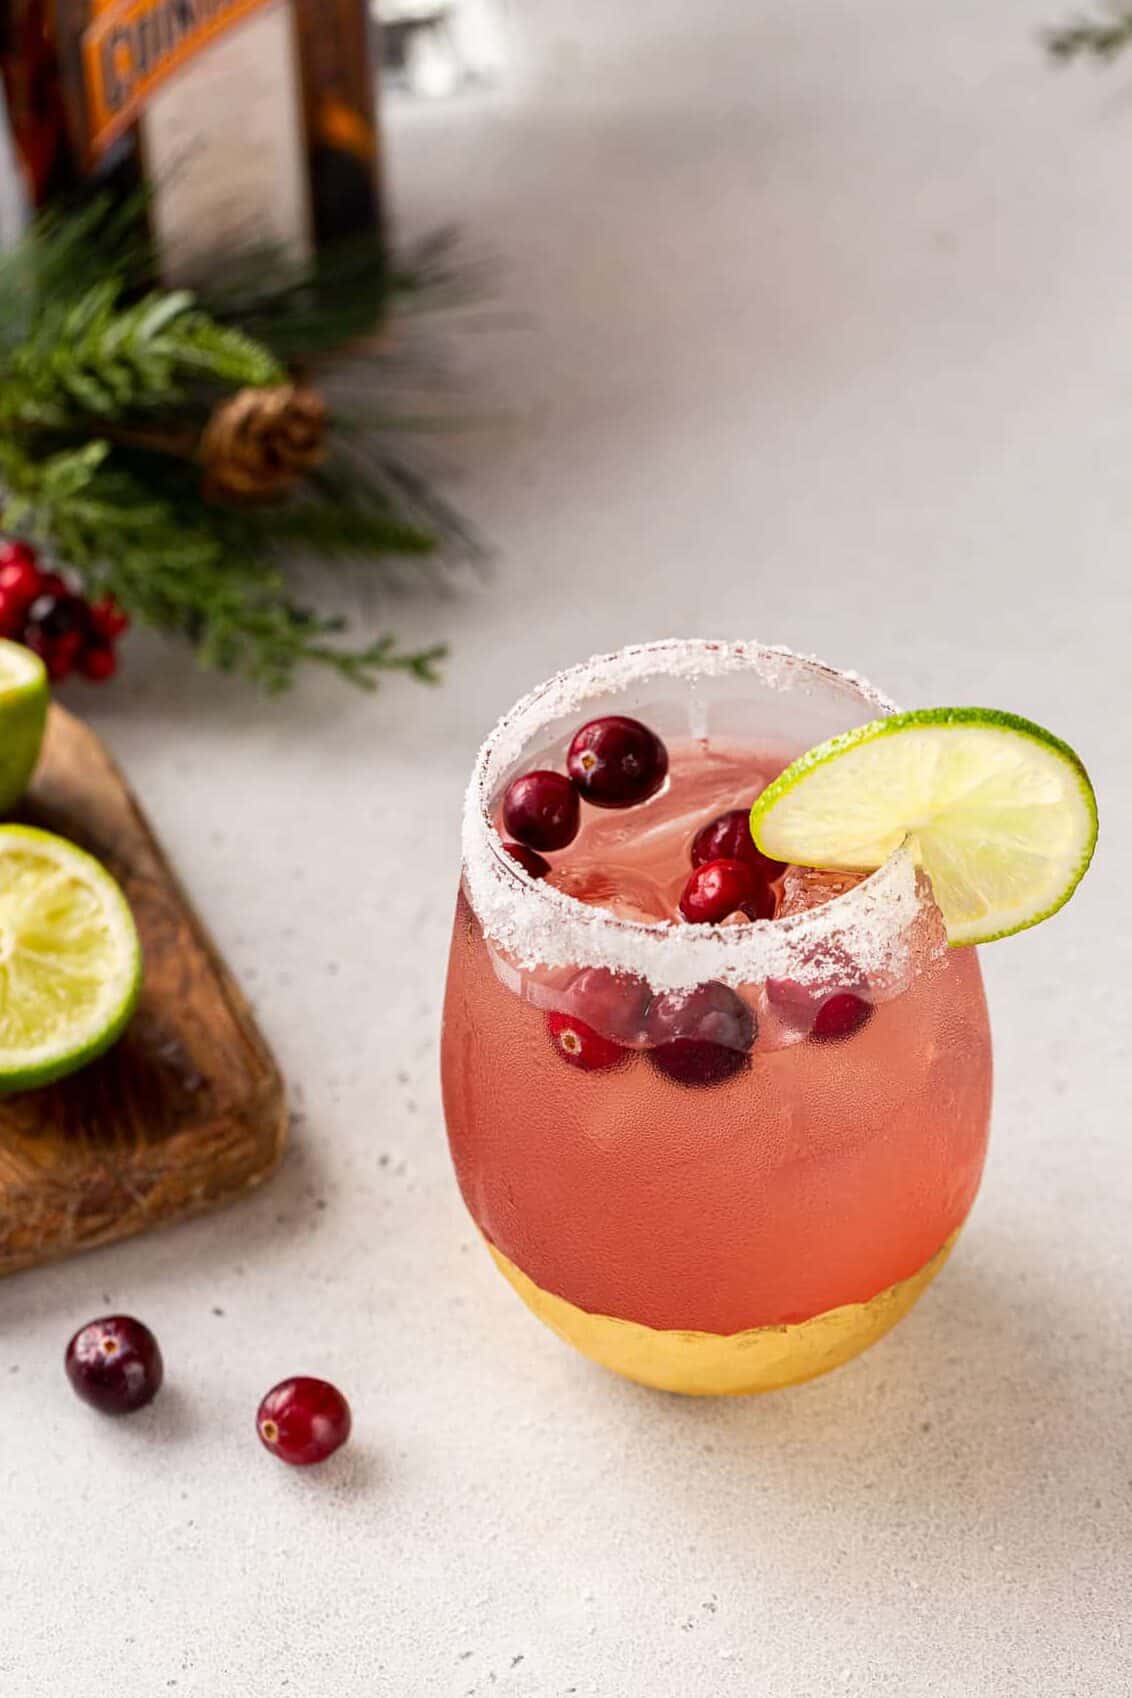 A Cranberry Margarita on a gray countertop in a gold-bottomed glass. The margarita has a cut lime garnish and cranberries floating on top. To the left of the glass are cranberries, cut limes on a cutting board, pine bough decorations, and a bottle of Cointreau.